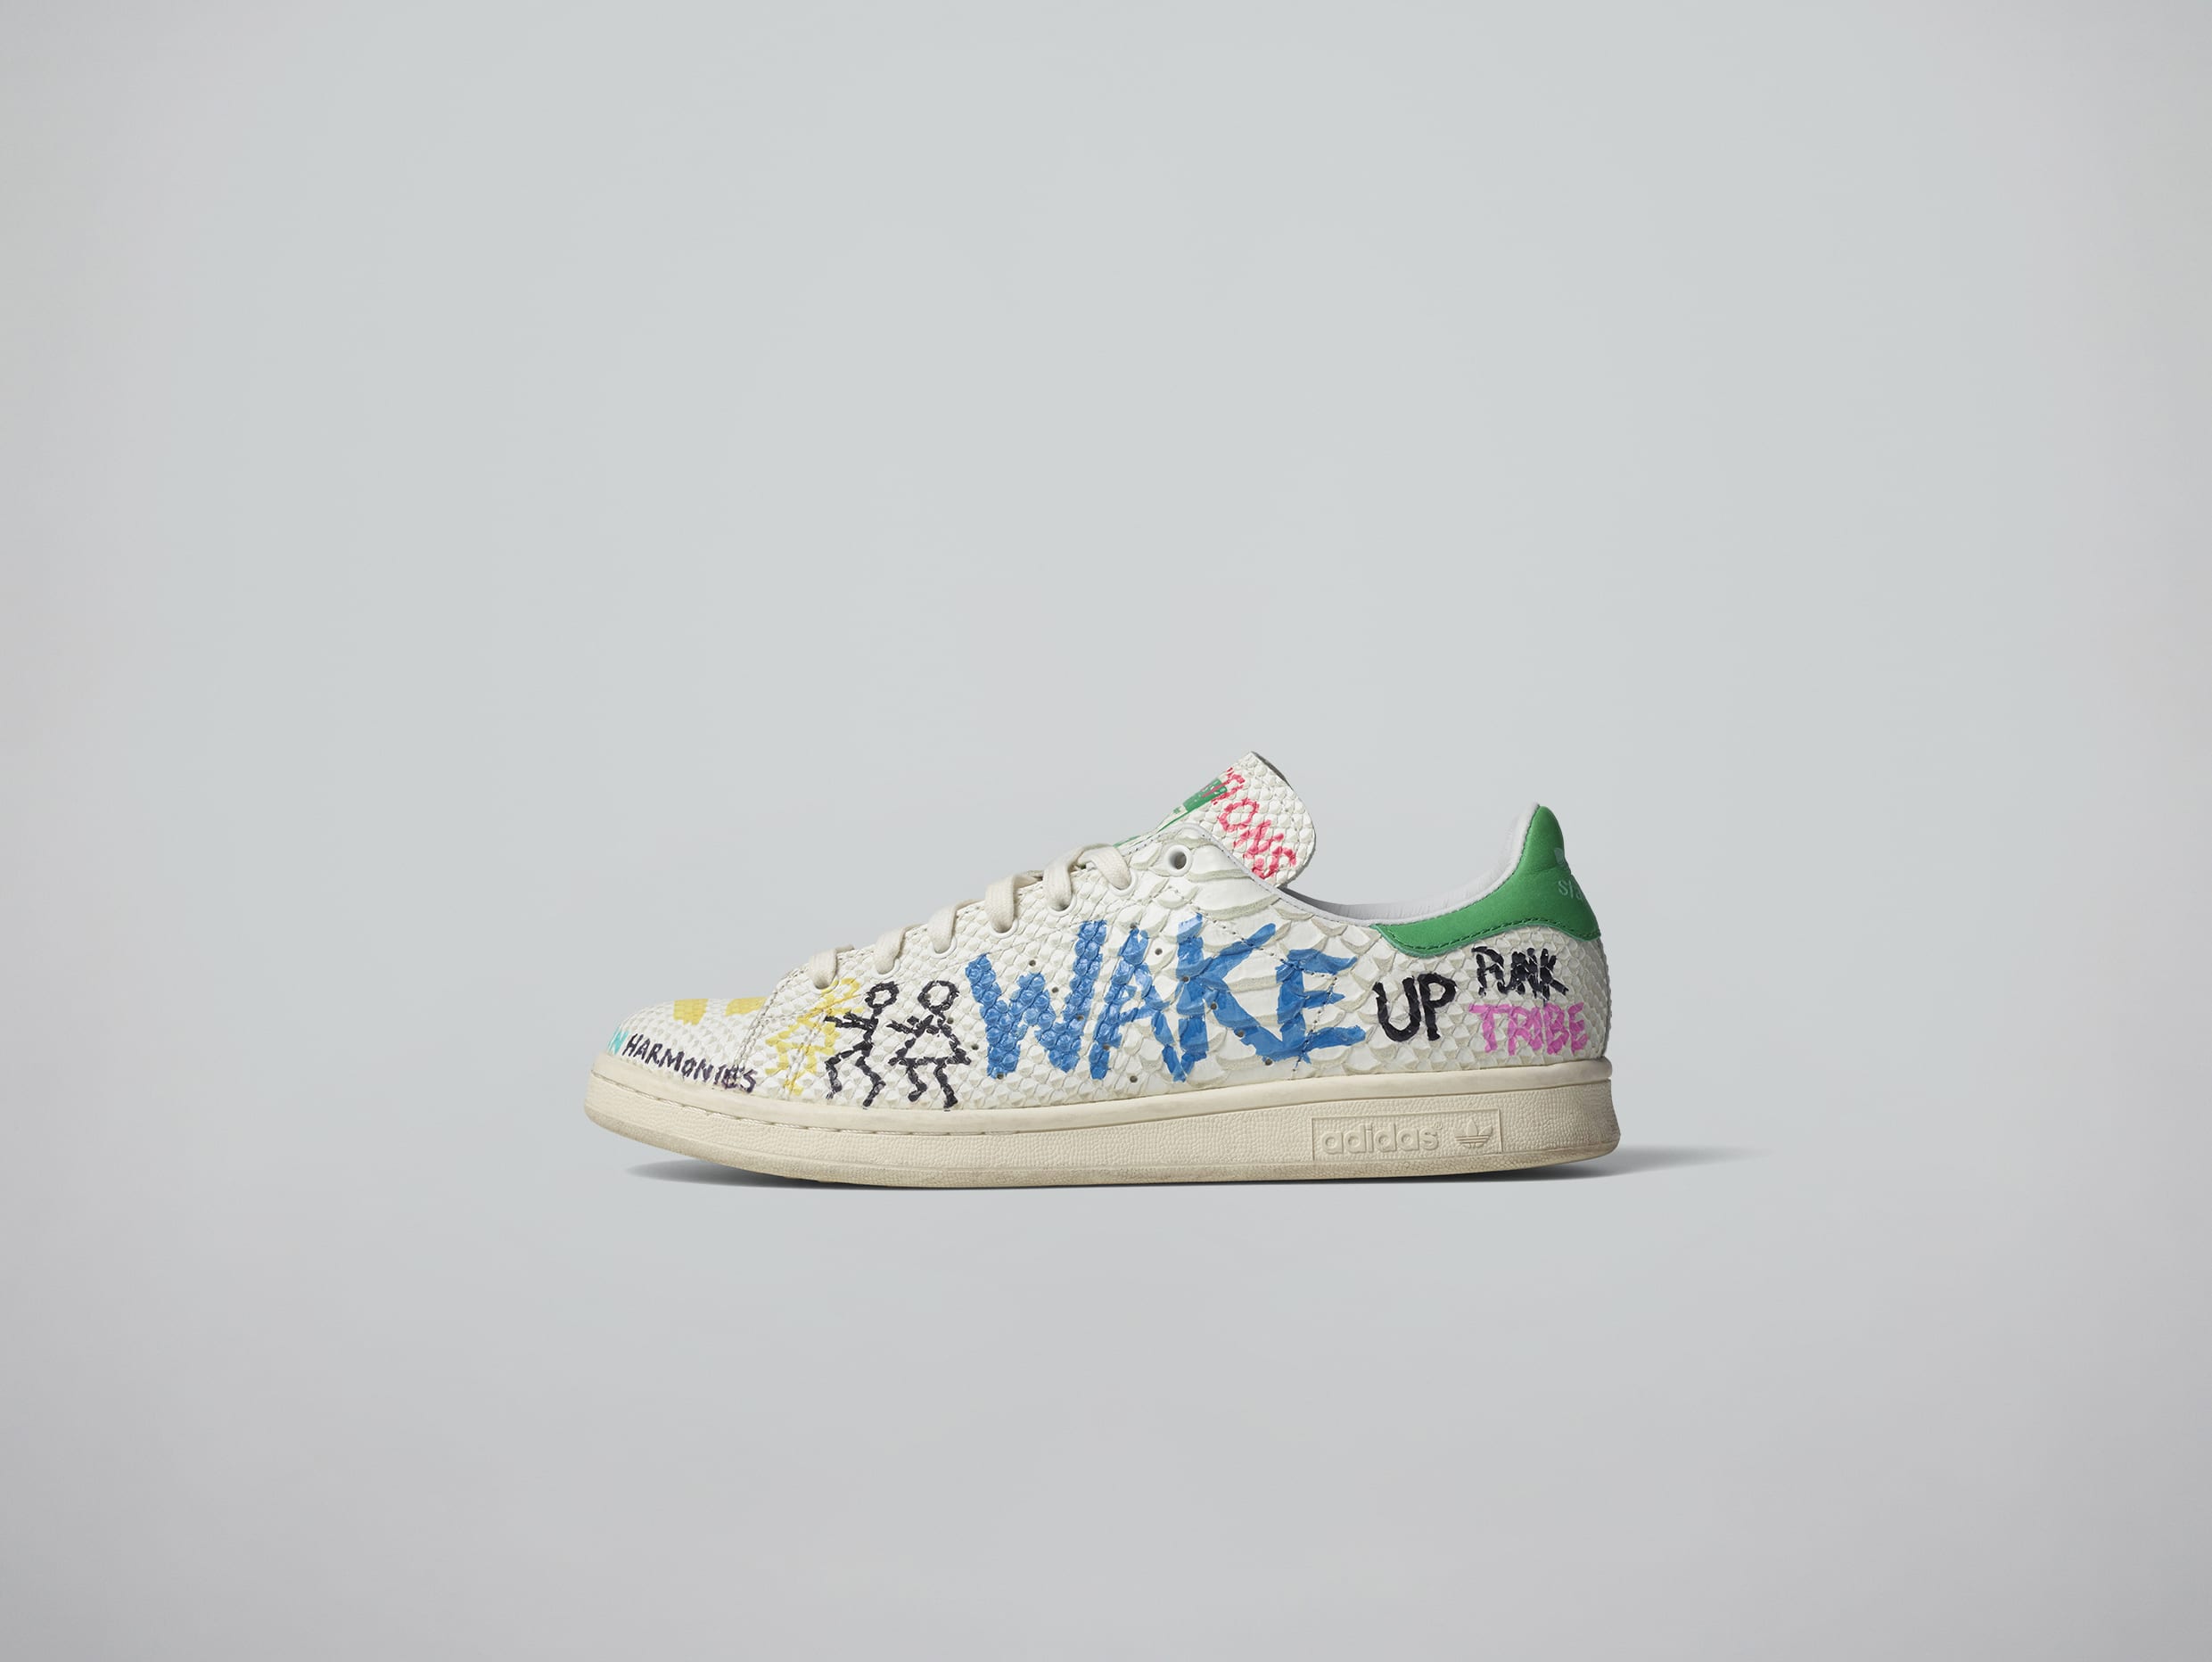 A look at a sneaker being auctioned off by Pharrell